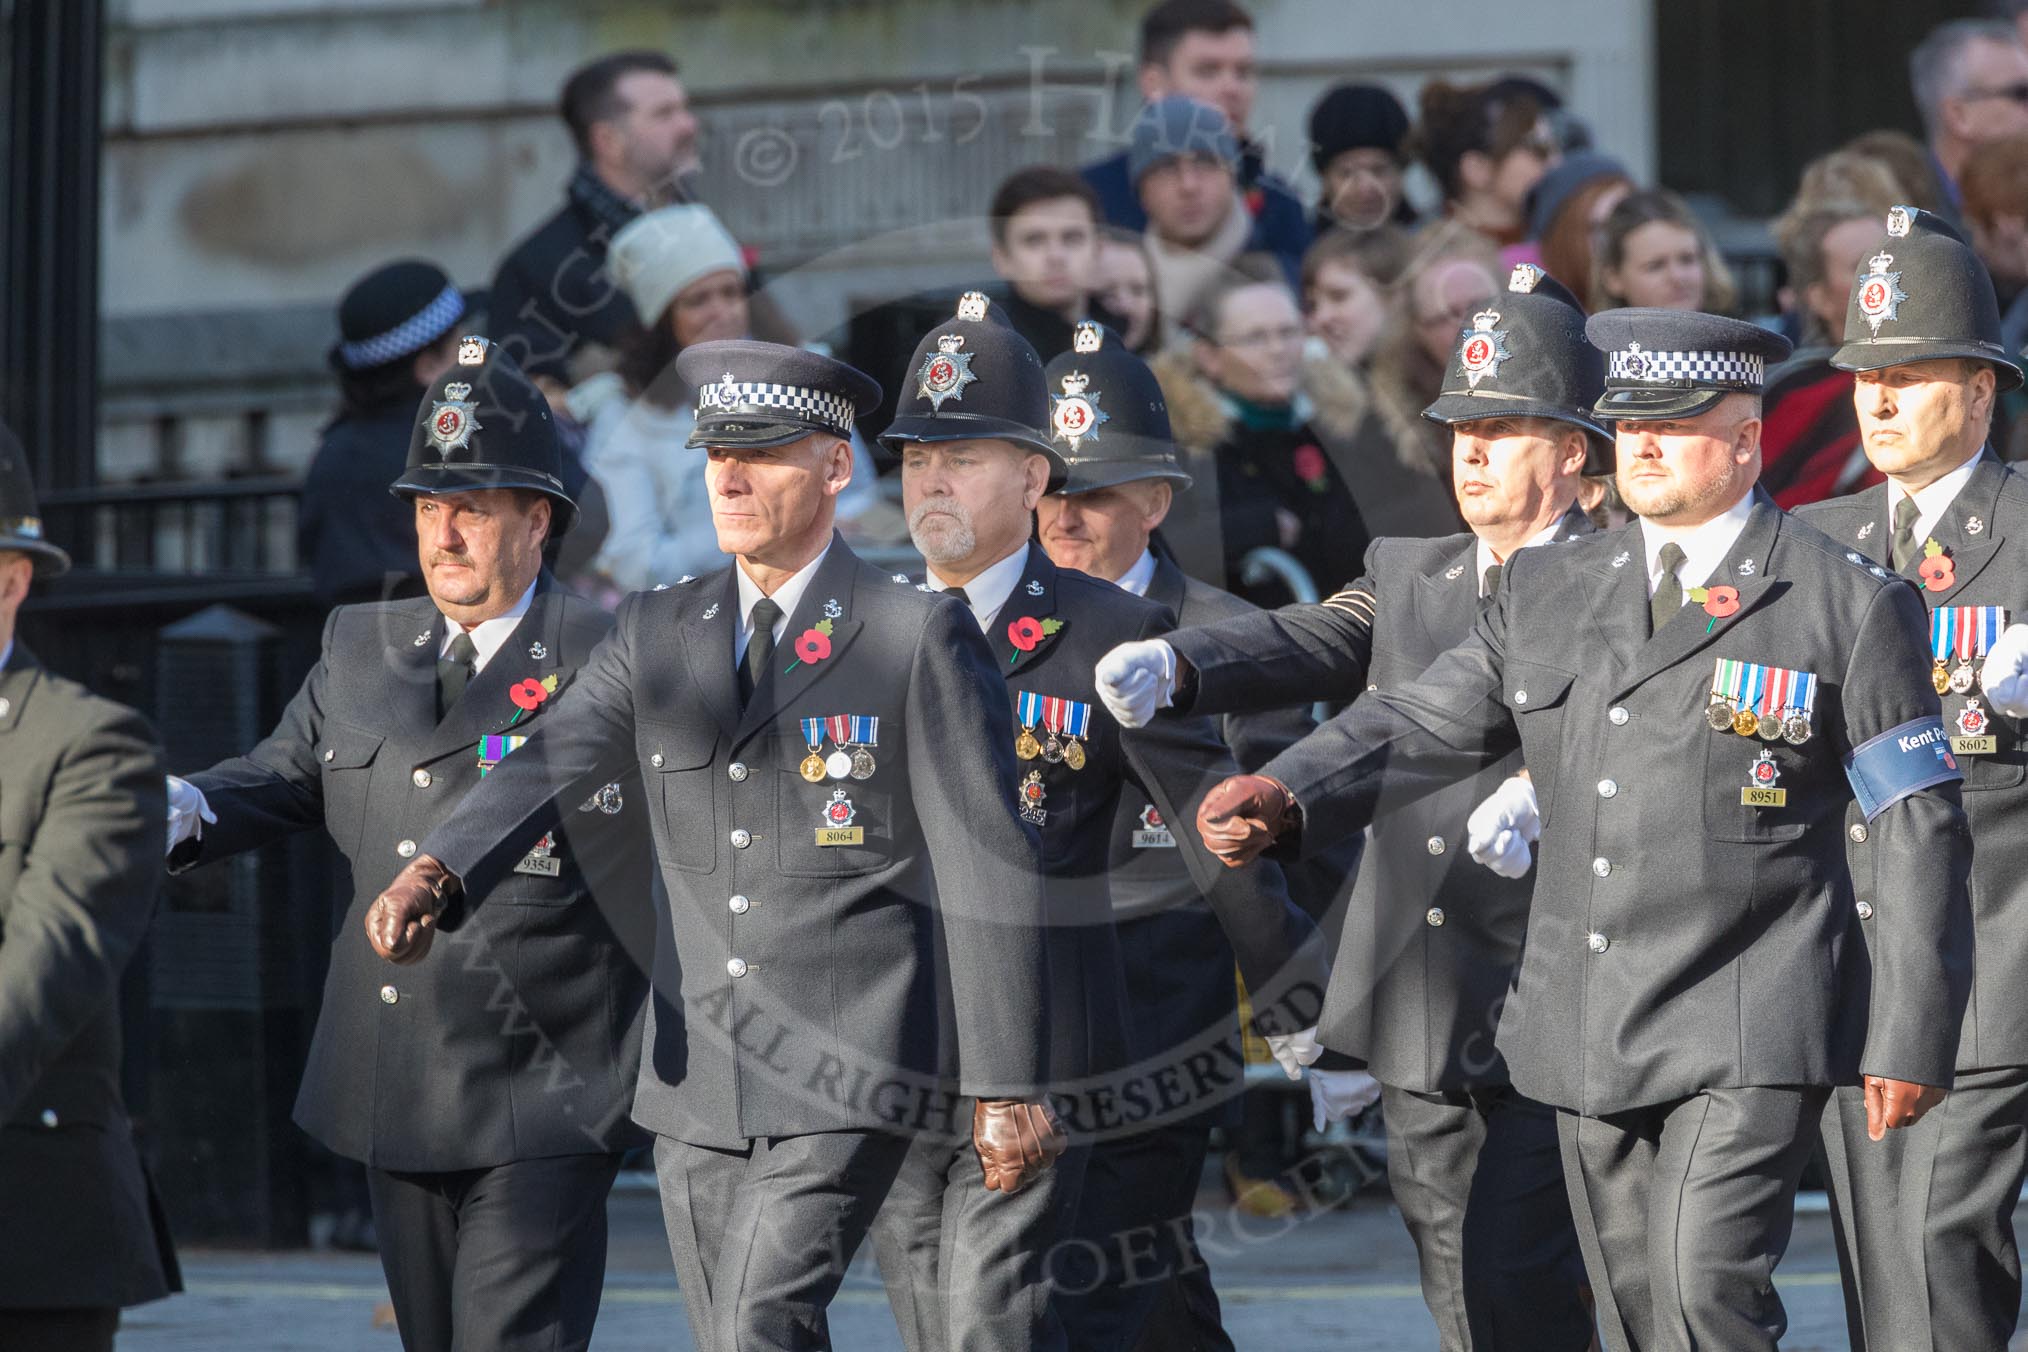 March Past, Remembrance Sunday at the Cenotaph 2016: M39 Kent Police.
Cenotaph, Whitehall, London SW1,
London,
Greater London,
United Kingdom,
on 13 November 2016 at 13:19, image #2926